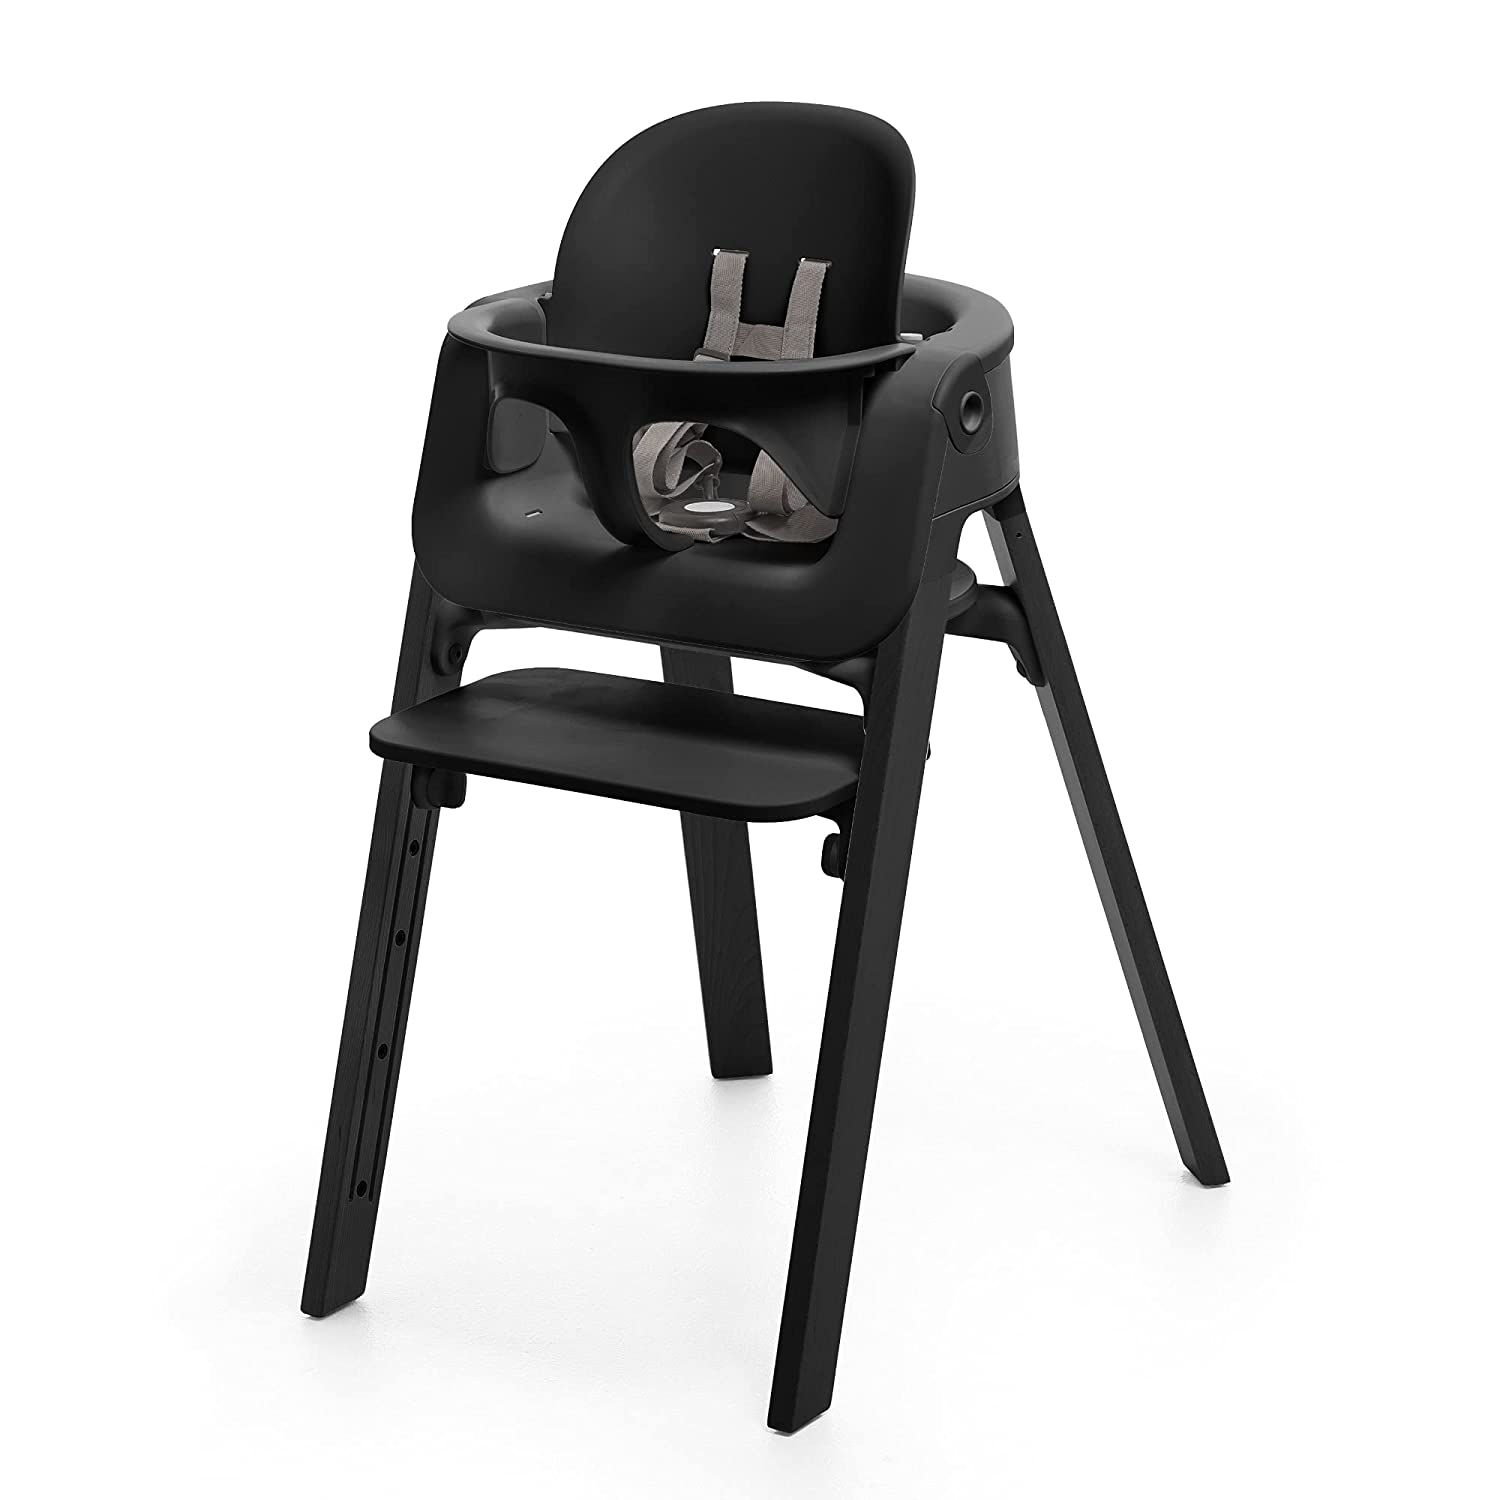 The Importance of Ergonomic Design in High Chairs: Supporting Proper Posture for Babies